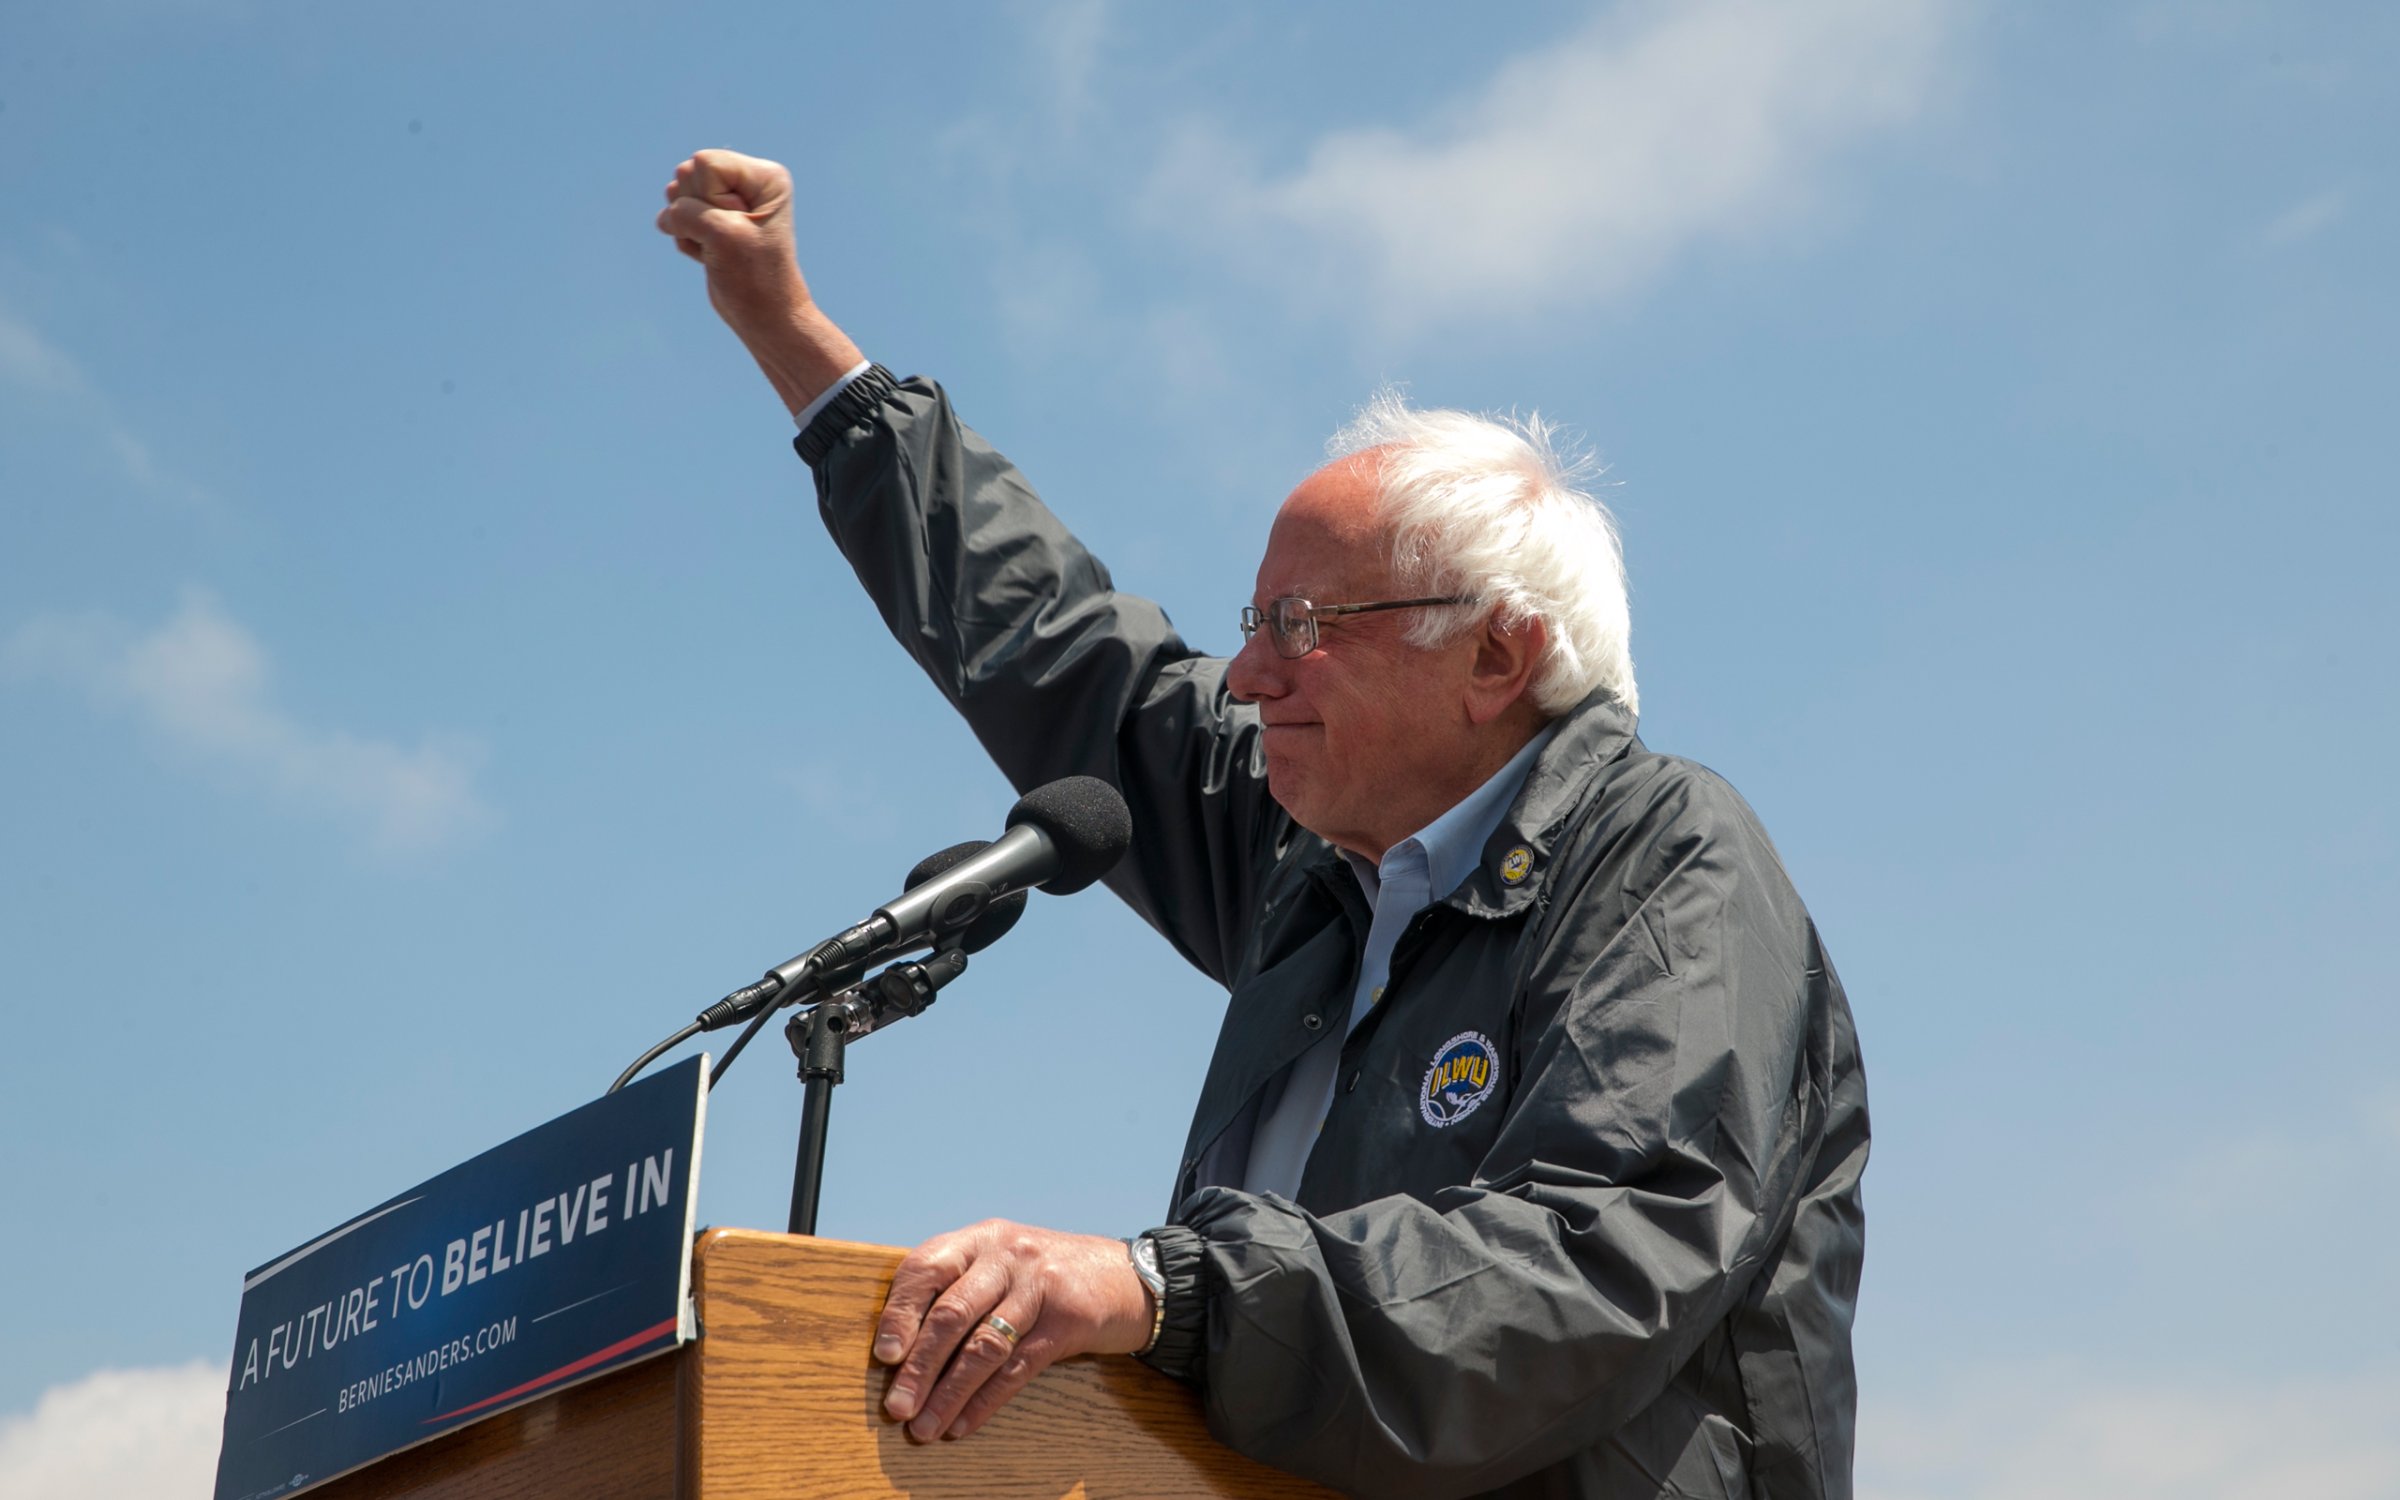 Democratic presidential candidate Sen. Bernie Sanders, I-Vt., salutes at a campaign rally at the Los Angeles Maritime Museum in San Pedro district of Los Angeles Friday, May 27, 2016. (AP Photo/Damian Dovarganes)